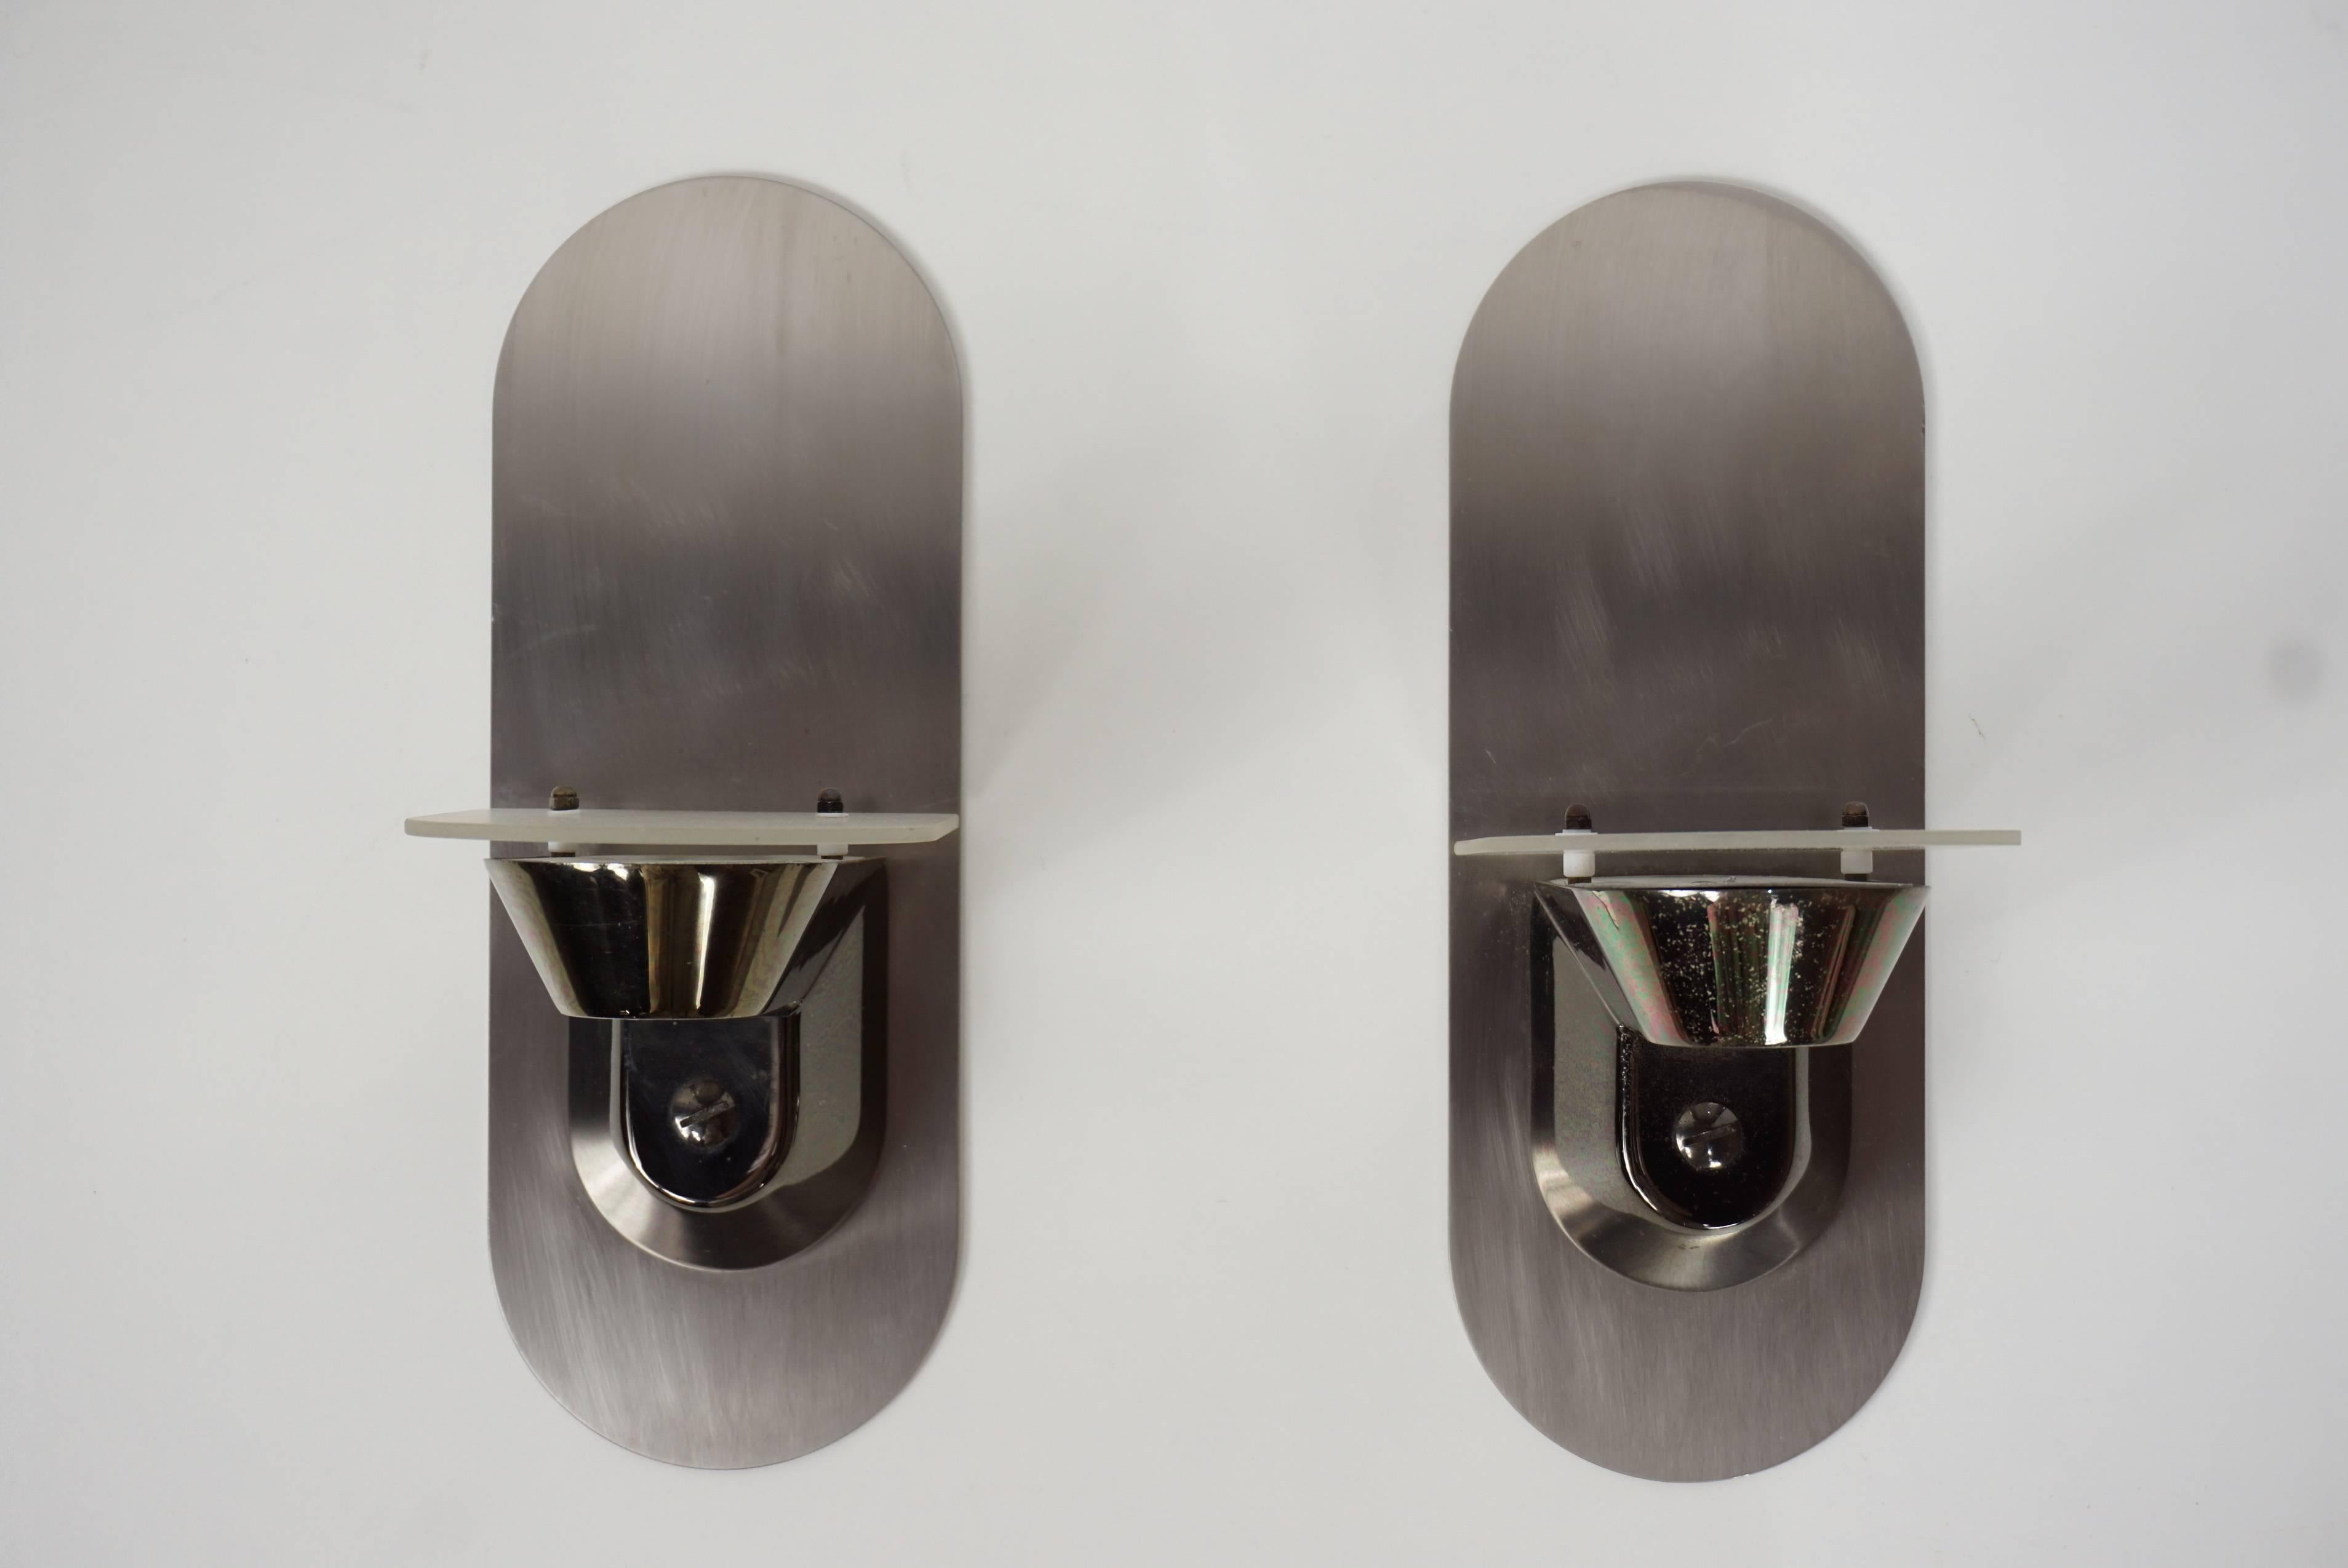 Pair of Stainless Steel and Glass Design Halogen Wall Sconces For Sale 3